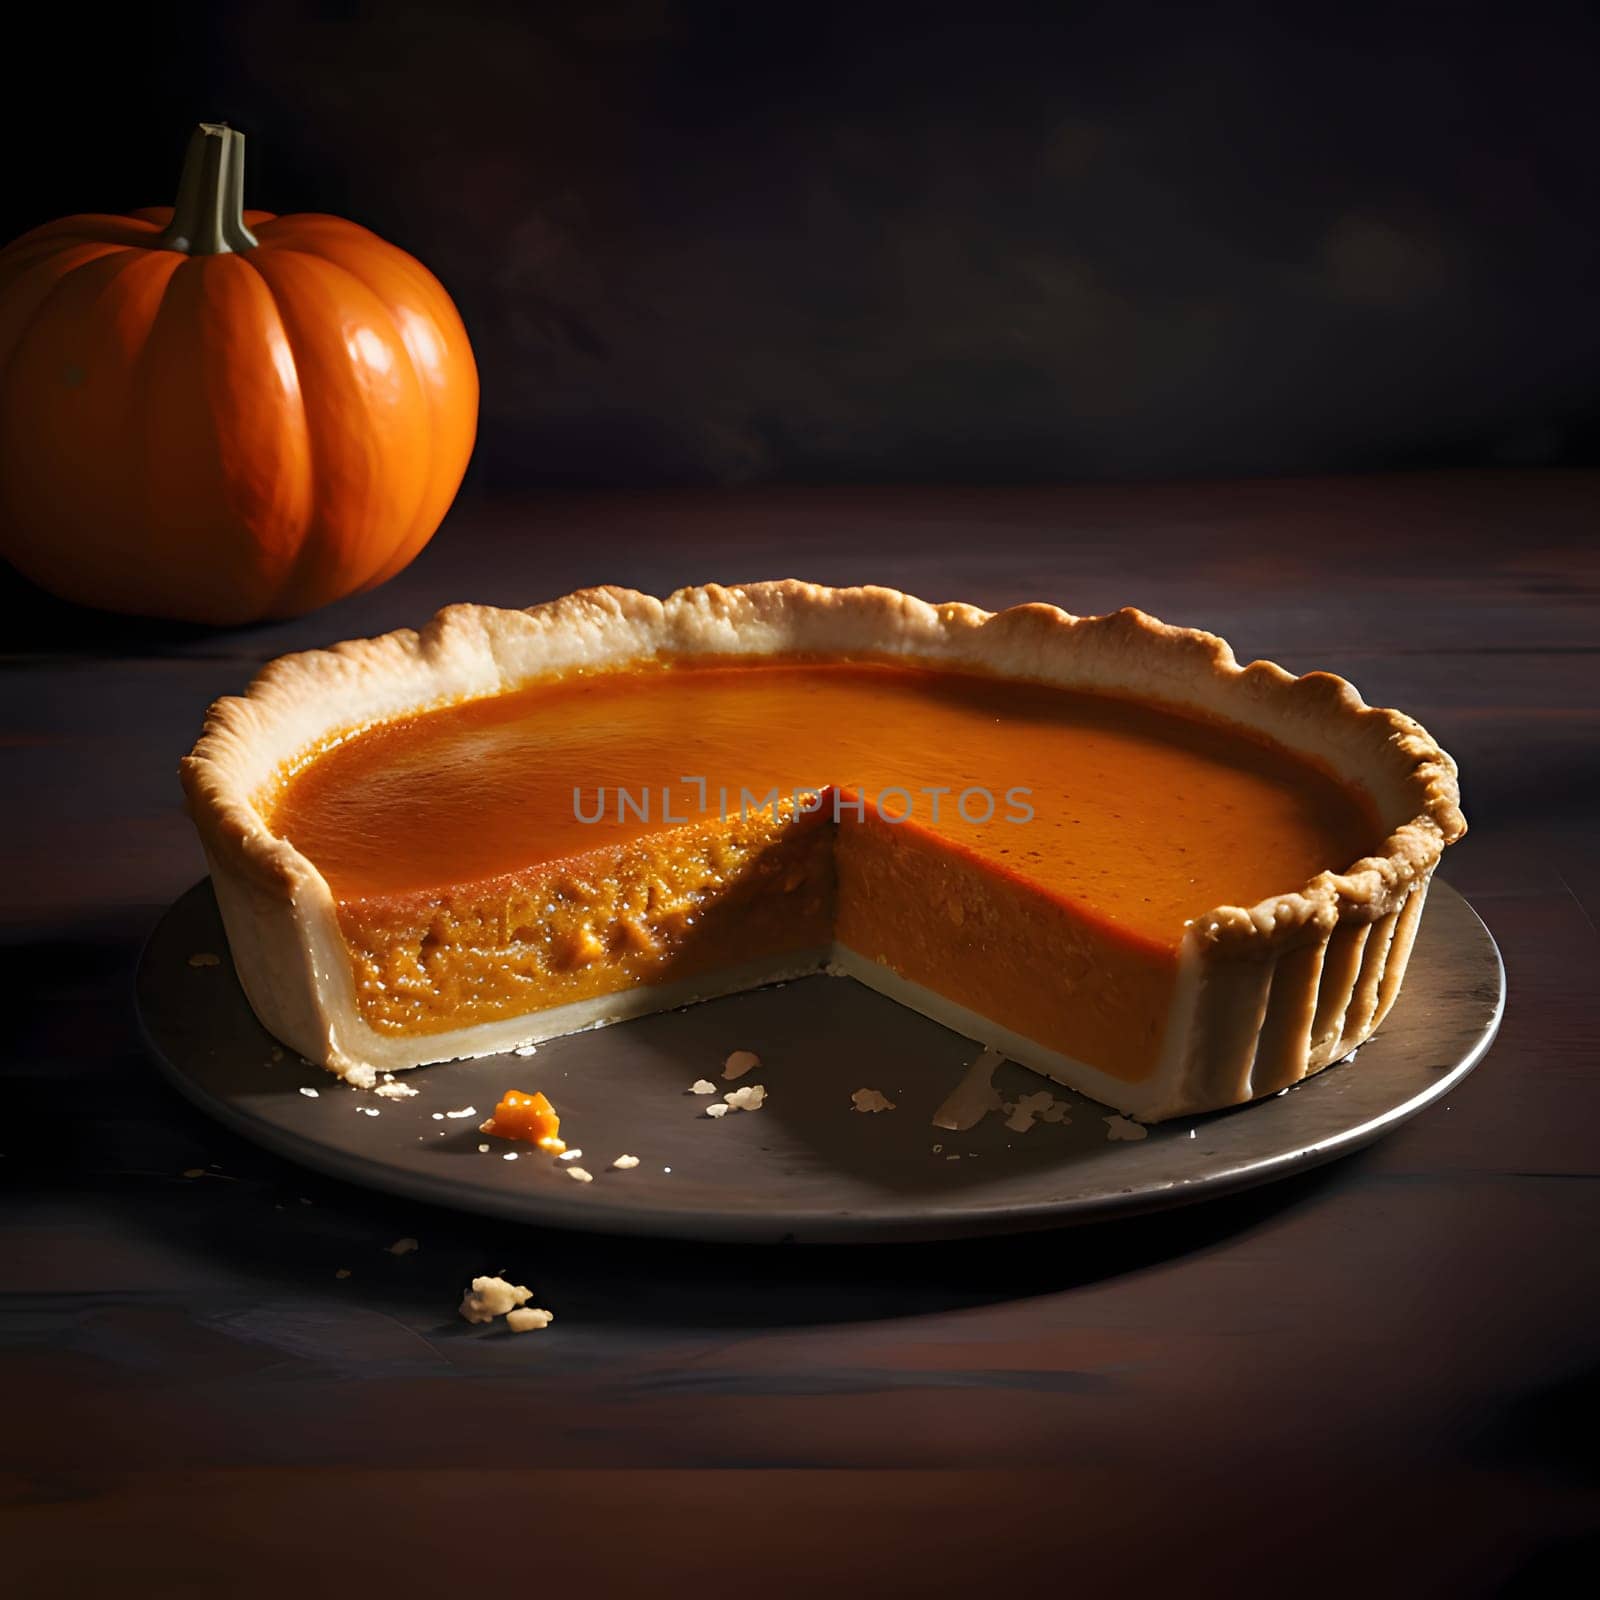 Pumpkin cake on a plate, dark background with pumpkin. Pumpkin as a dish of thanksgiving for the harvest. An atmosphere of joy and celebration.